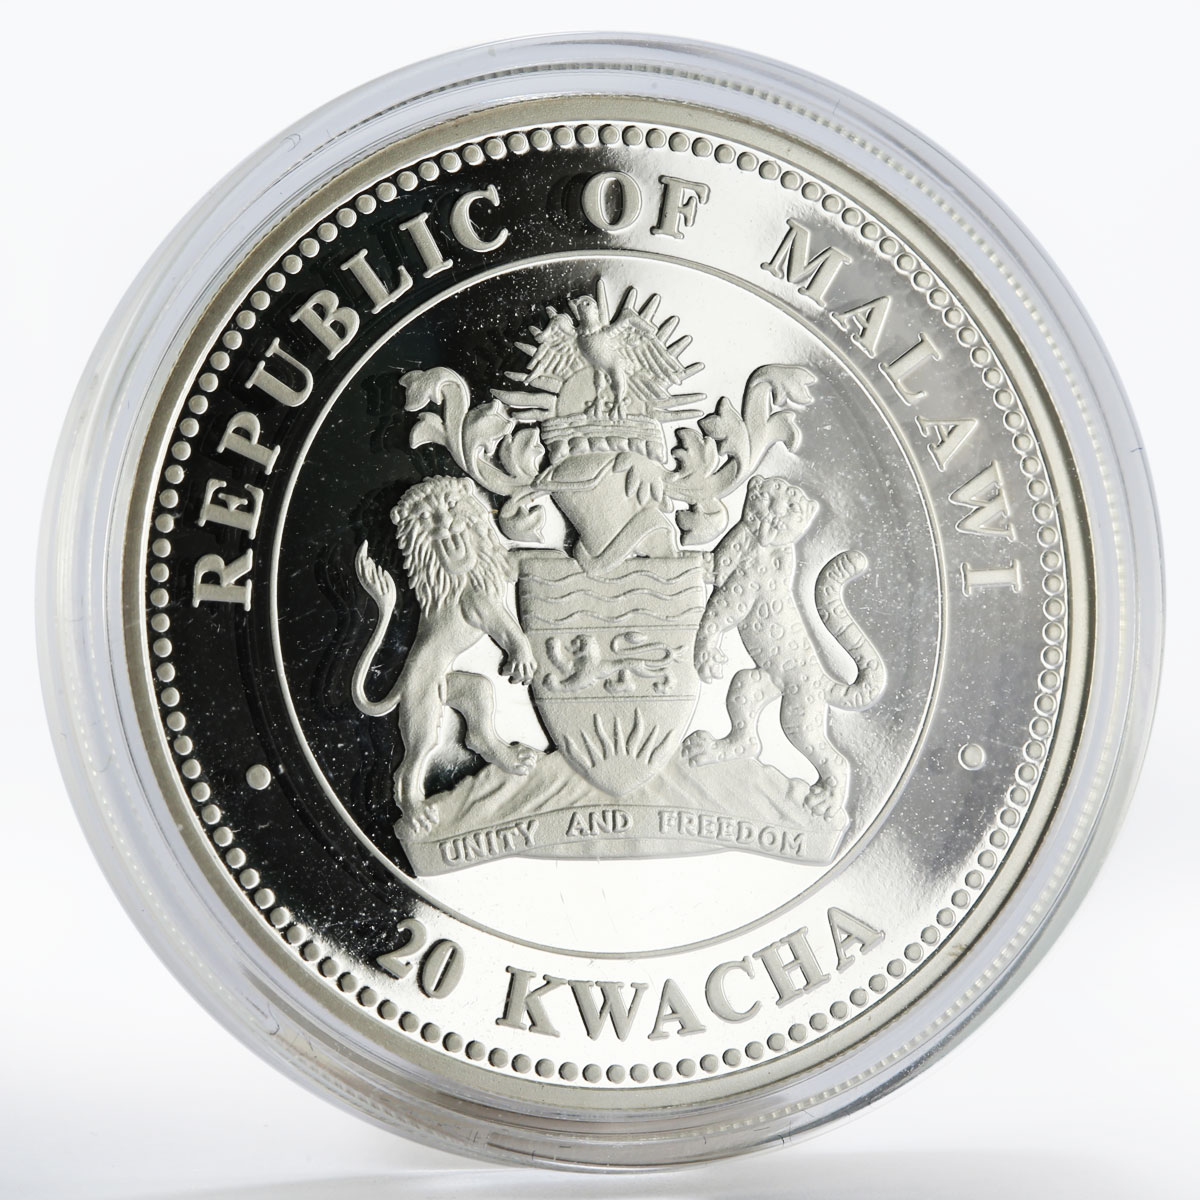 Malawi 20 kwacha Year of the Rabbit colored proof silver coin 2011